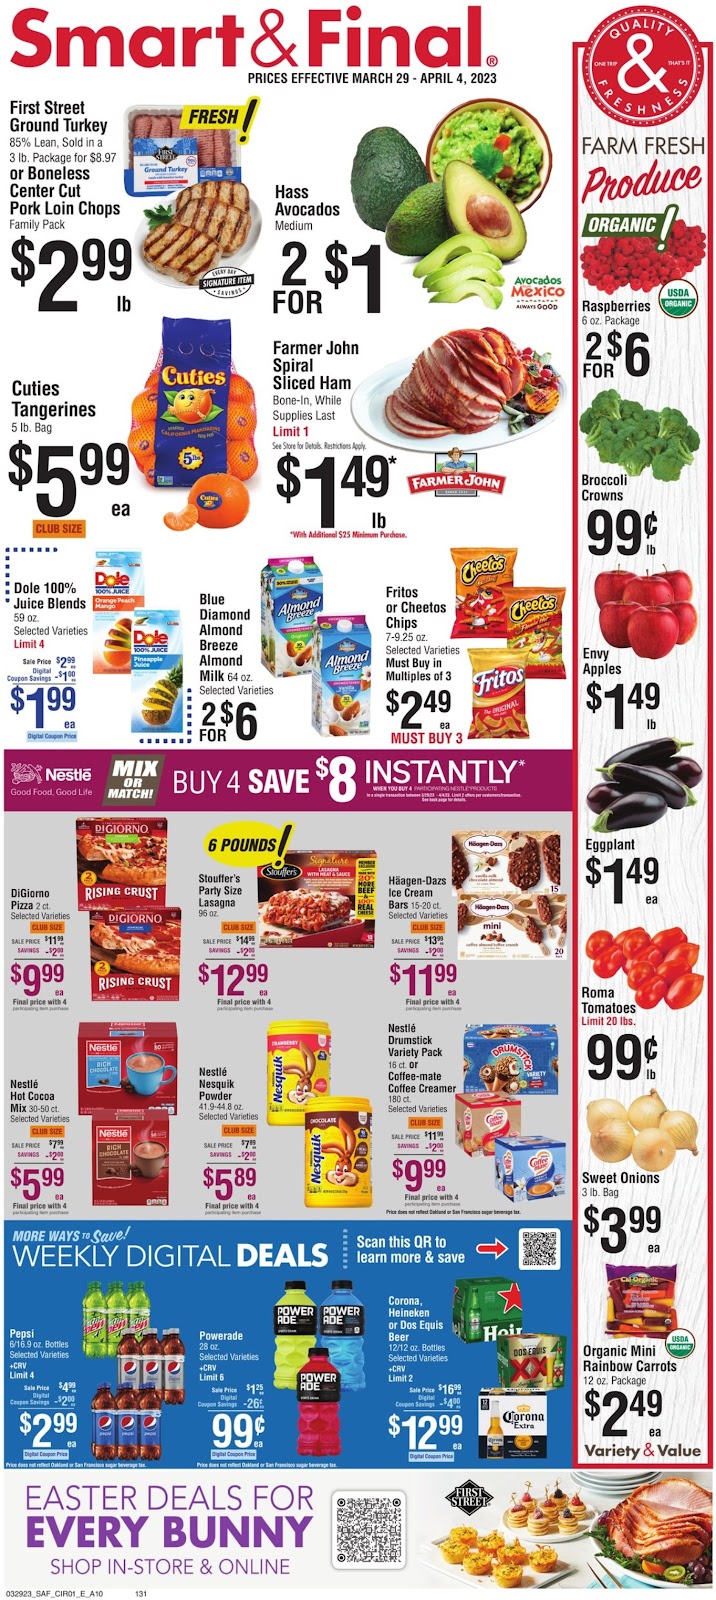 Smart and Final Weekly Ad - 1